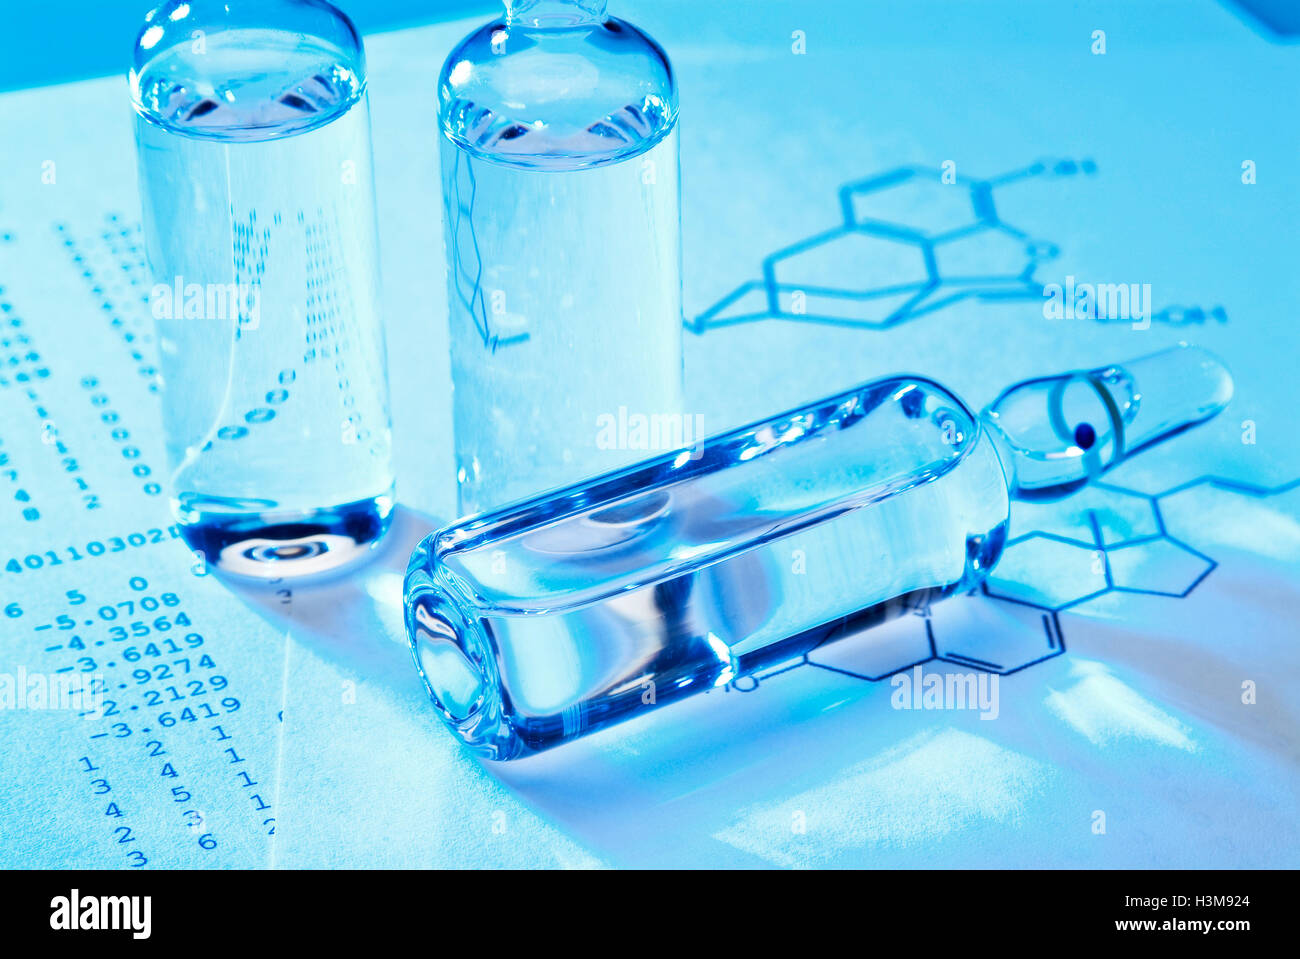 Vials with grout on a document with structural formula. Stock Photo